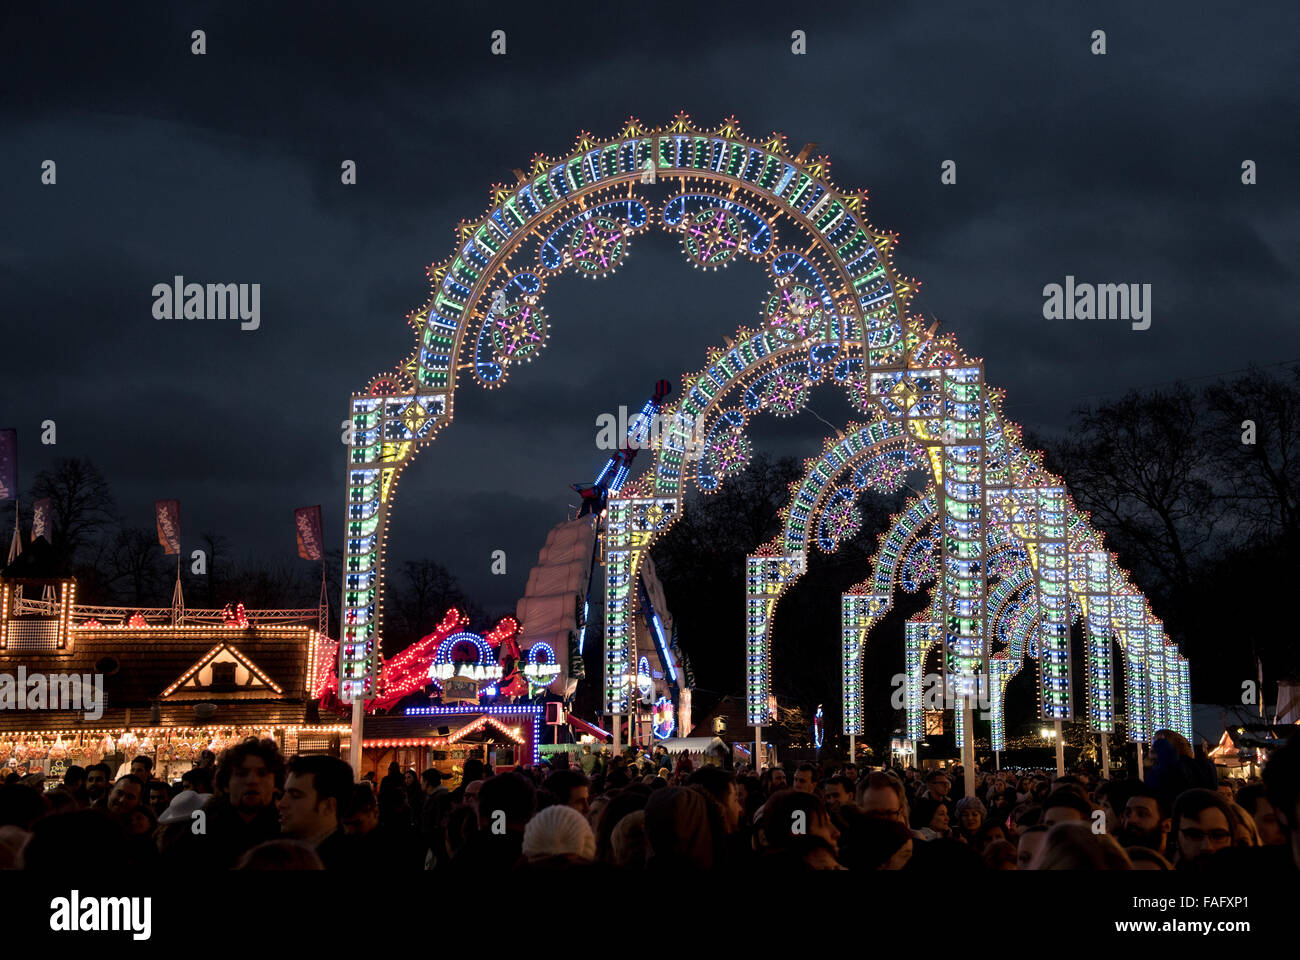 People at Winter Wonderland amusement park  in Hyde park in London UK during Christmas and New year’s celebrations Stock Photo